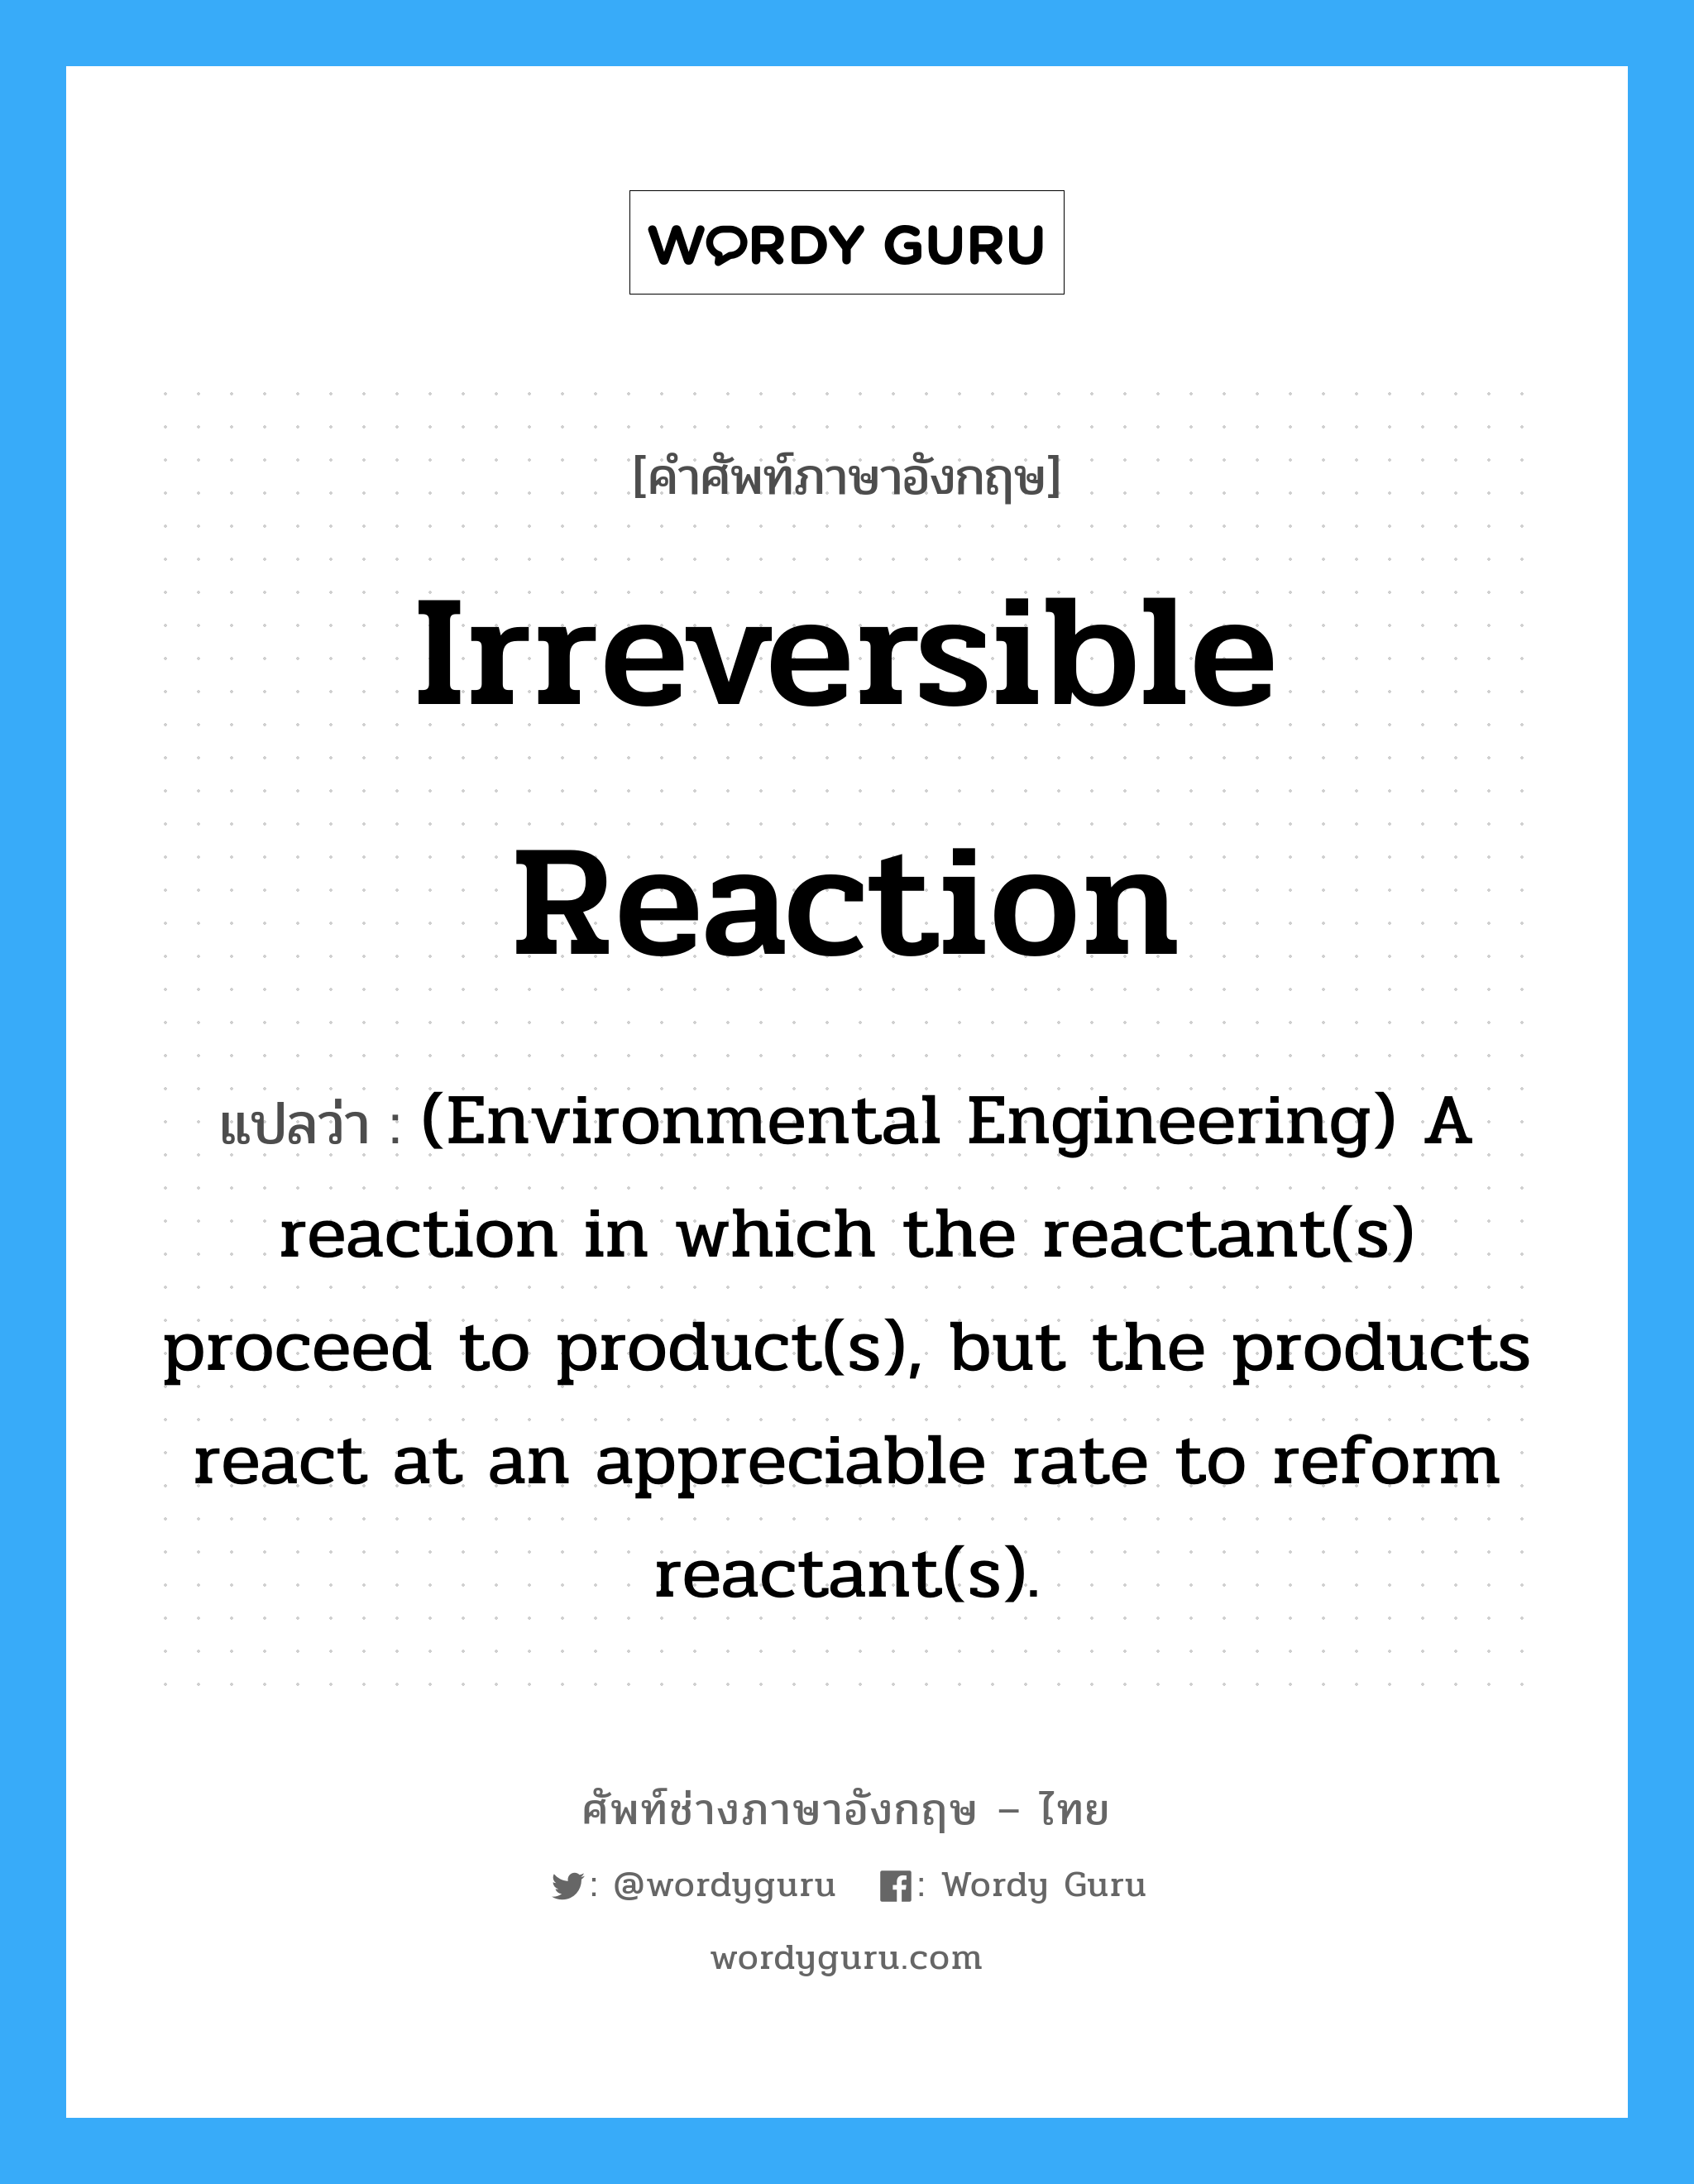 Irreversible reaction แปลว่า?, คำศัพท์ช่างภาษาอังกฤษ - ไทย Irreversible reaction คำศัพท์ภาษาอังกฤษ Irreversible reaction แปลว่า (Environmental Engineering) A reaction in which the reactant(s) proceed to product(s), but the products react at an appreciable rate to reform reactant(s).